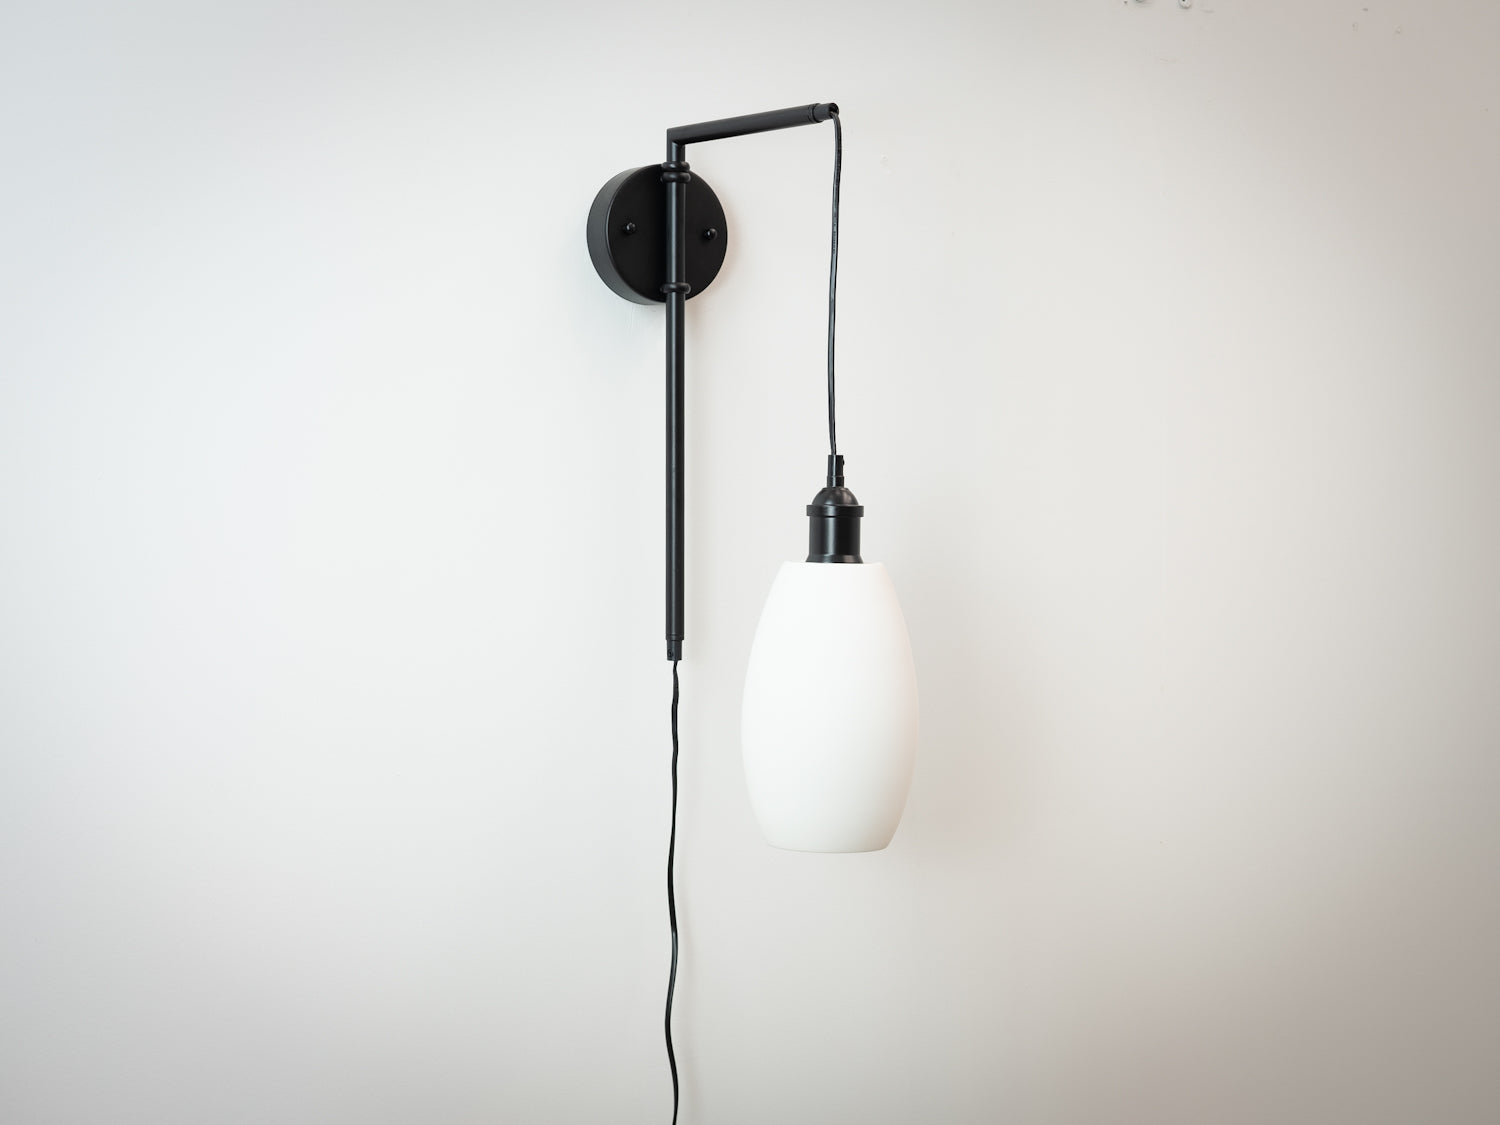 Frankie Swing Arm Wall Light with Ceramic Shade Options